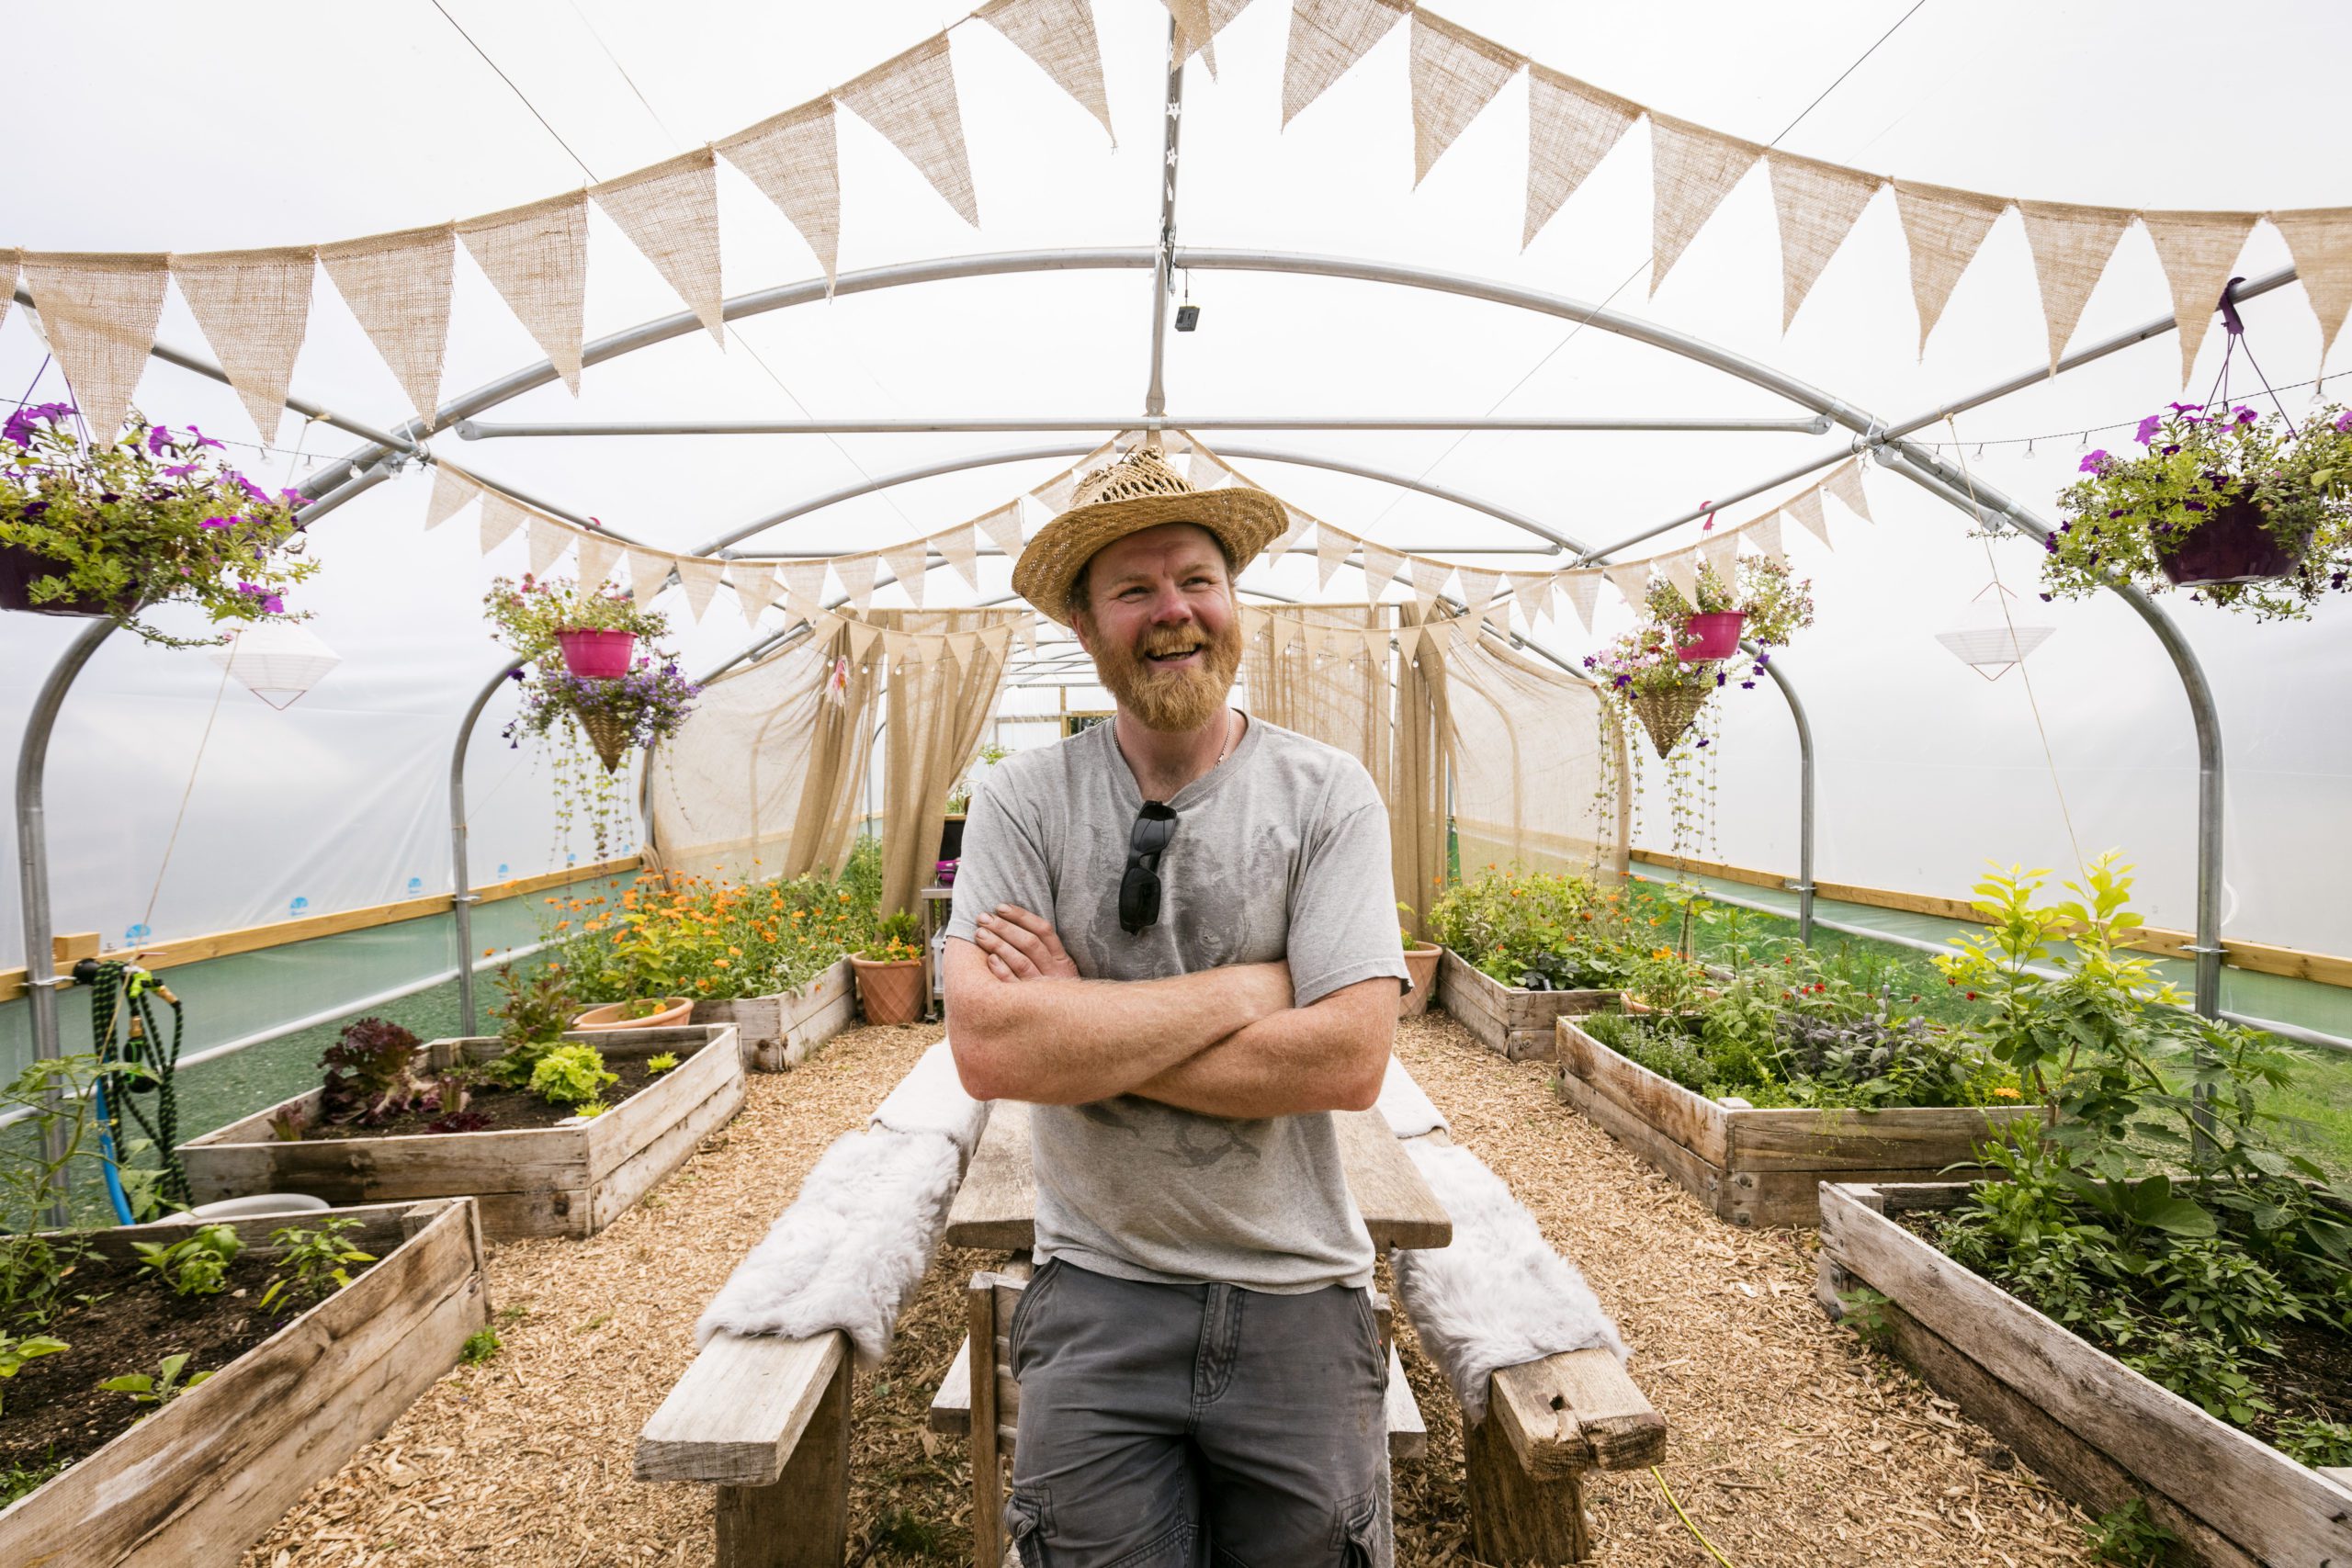 The Rebel Farmer looking at camera, in a polytunnel with bunting and plants.